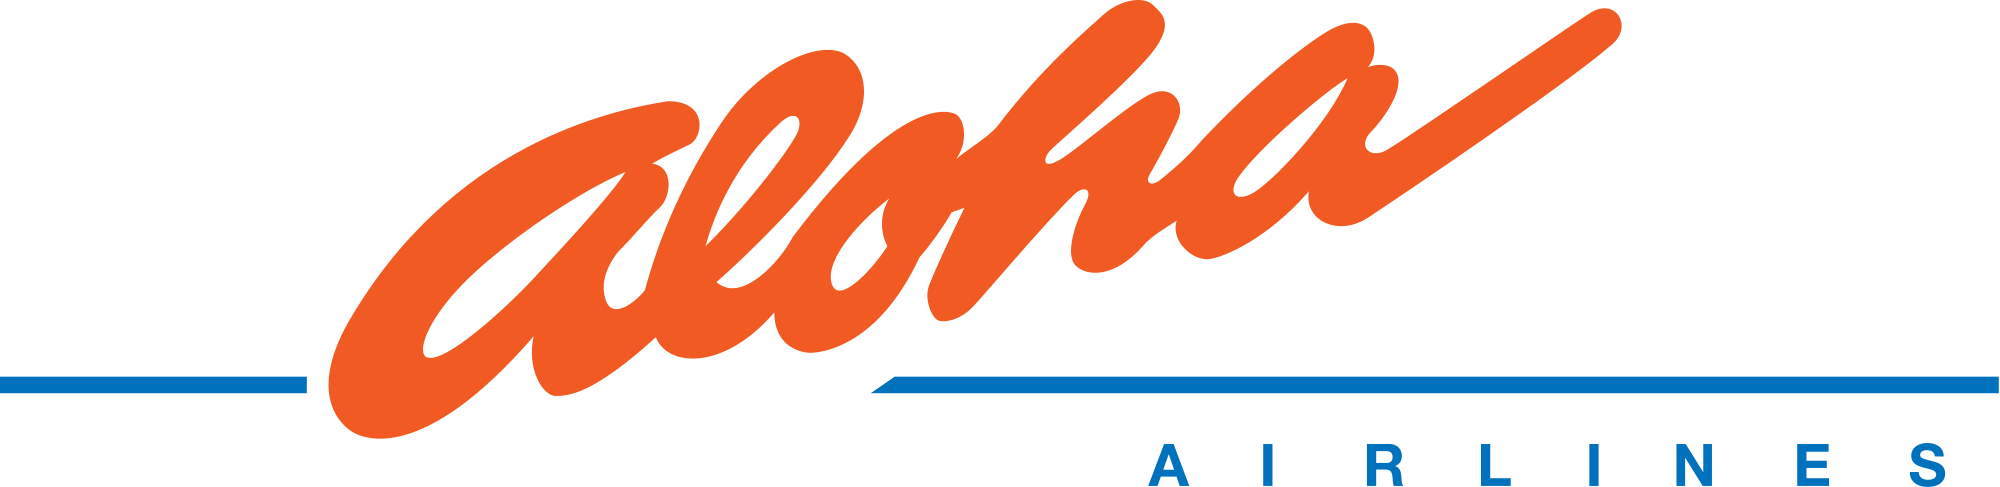 Blue Orange Red Airline Logo - File:Aloha Airlines Logo.svg - Wikimedia Commons